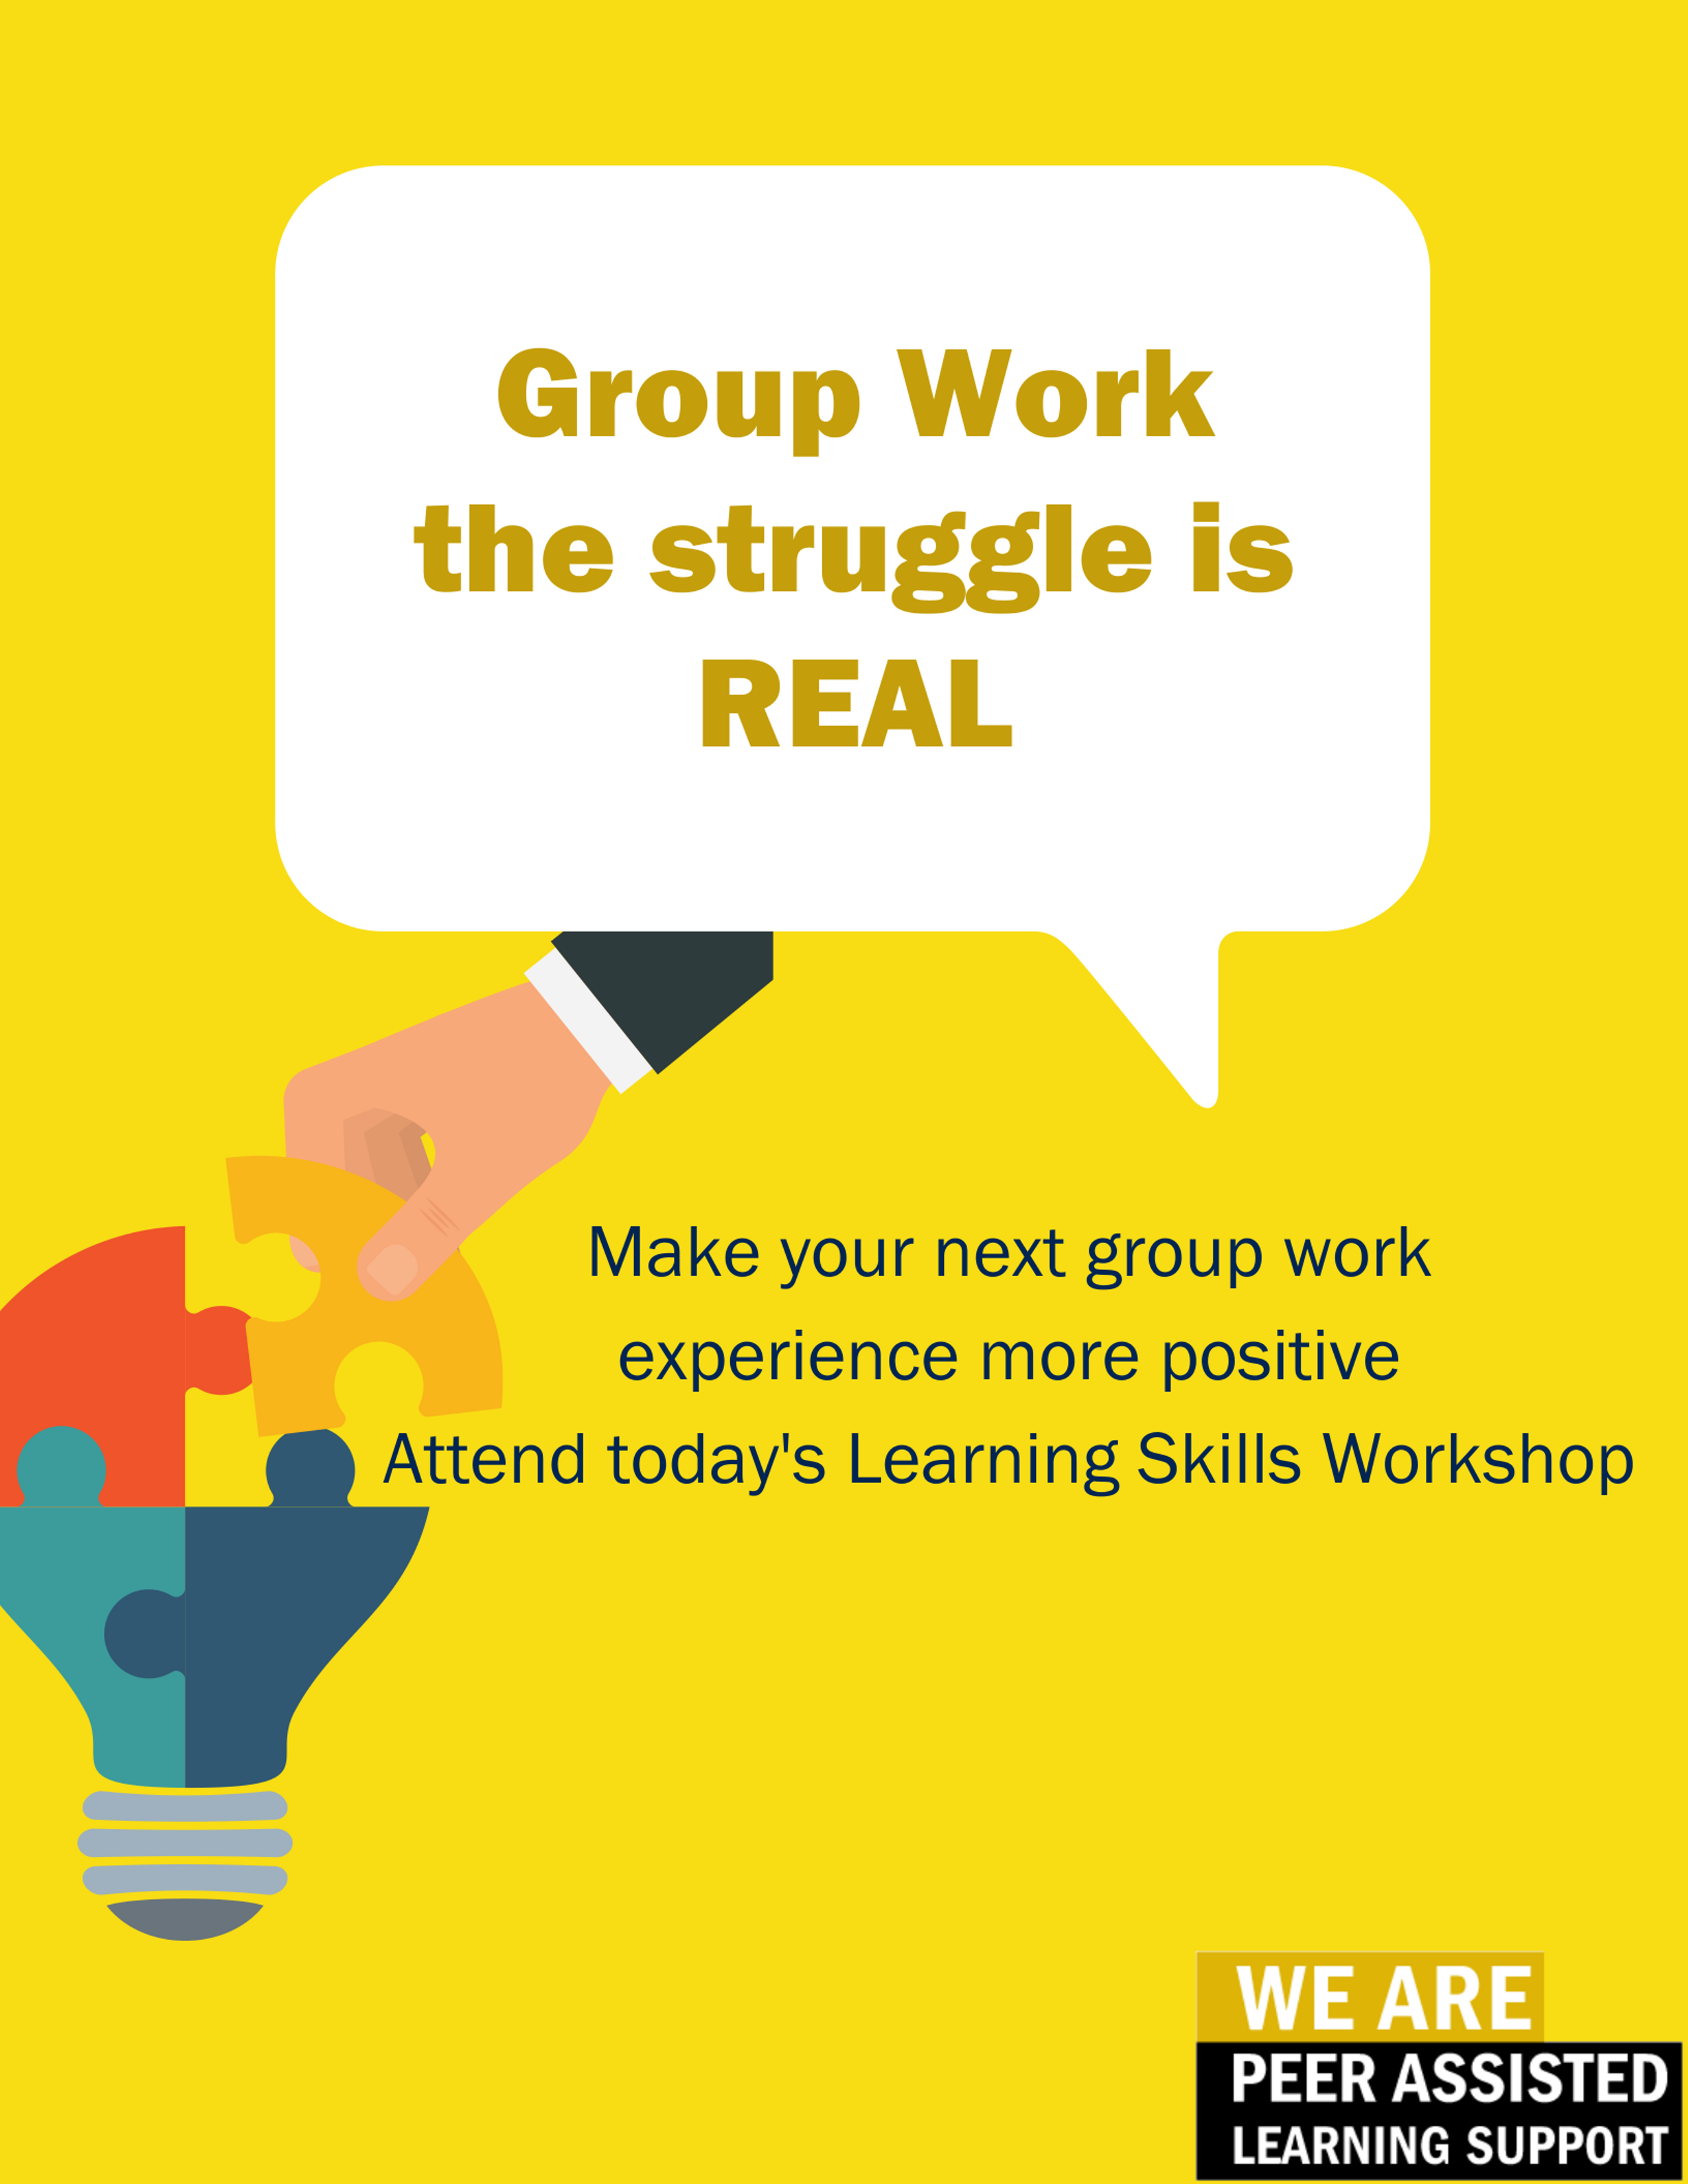 Attend this workshop to make your next group work a more positive experience.